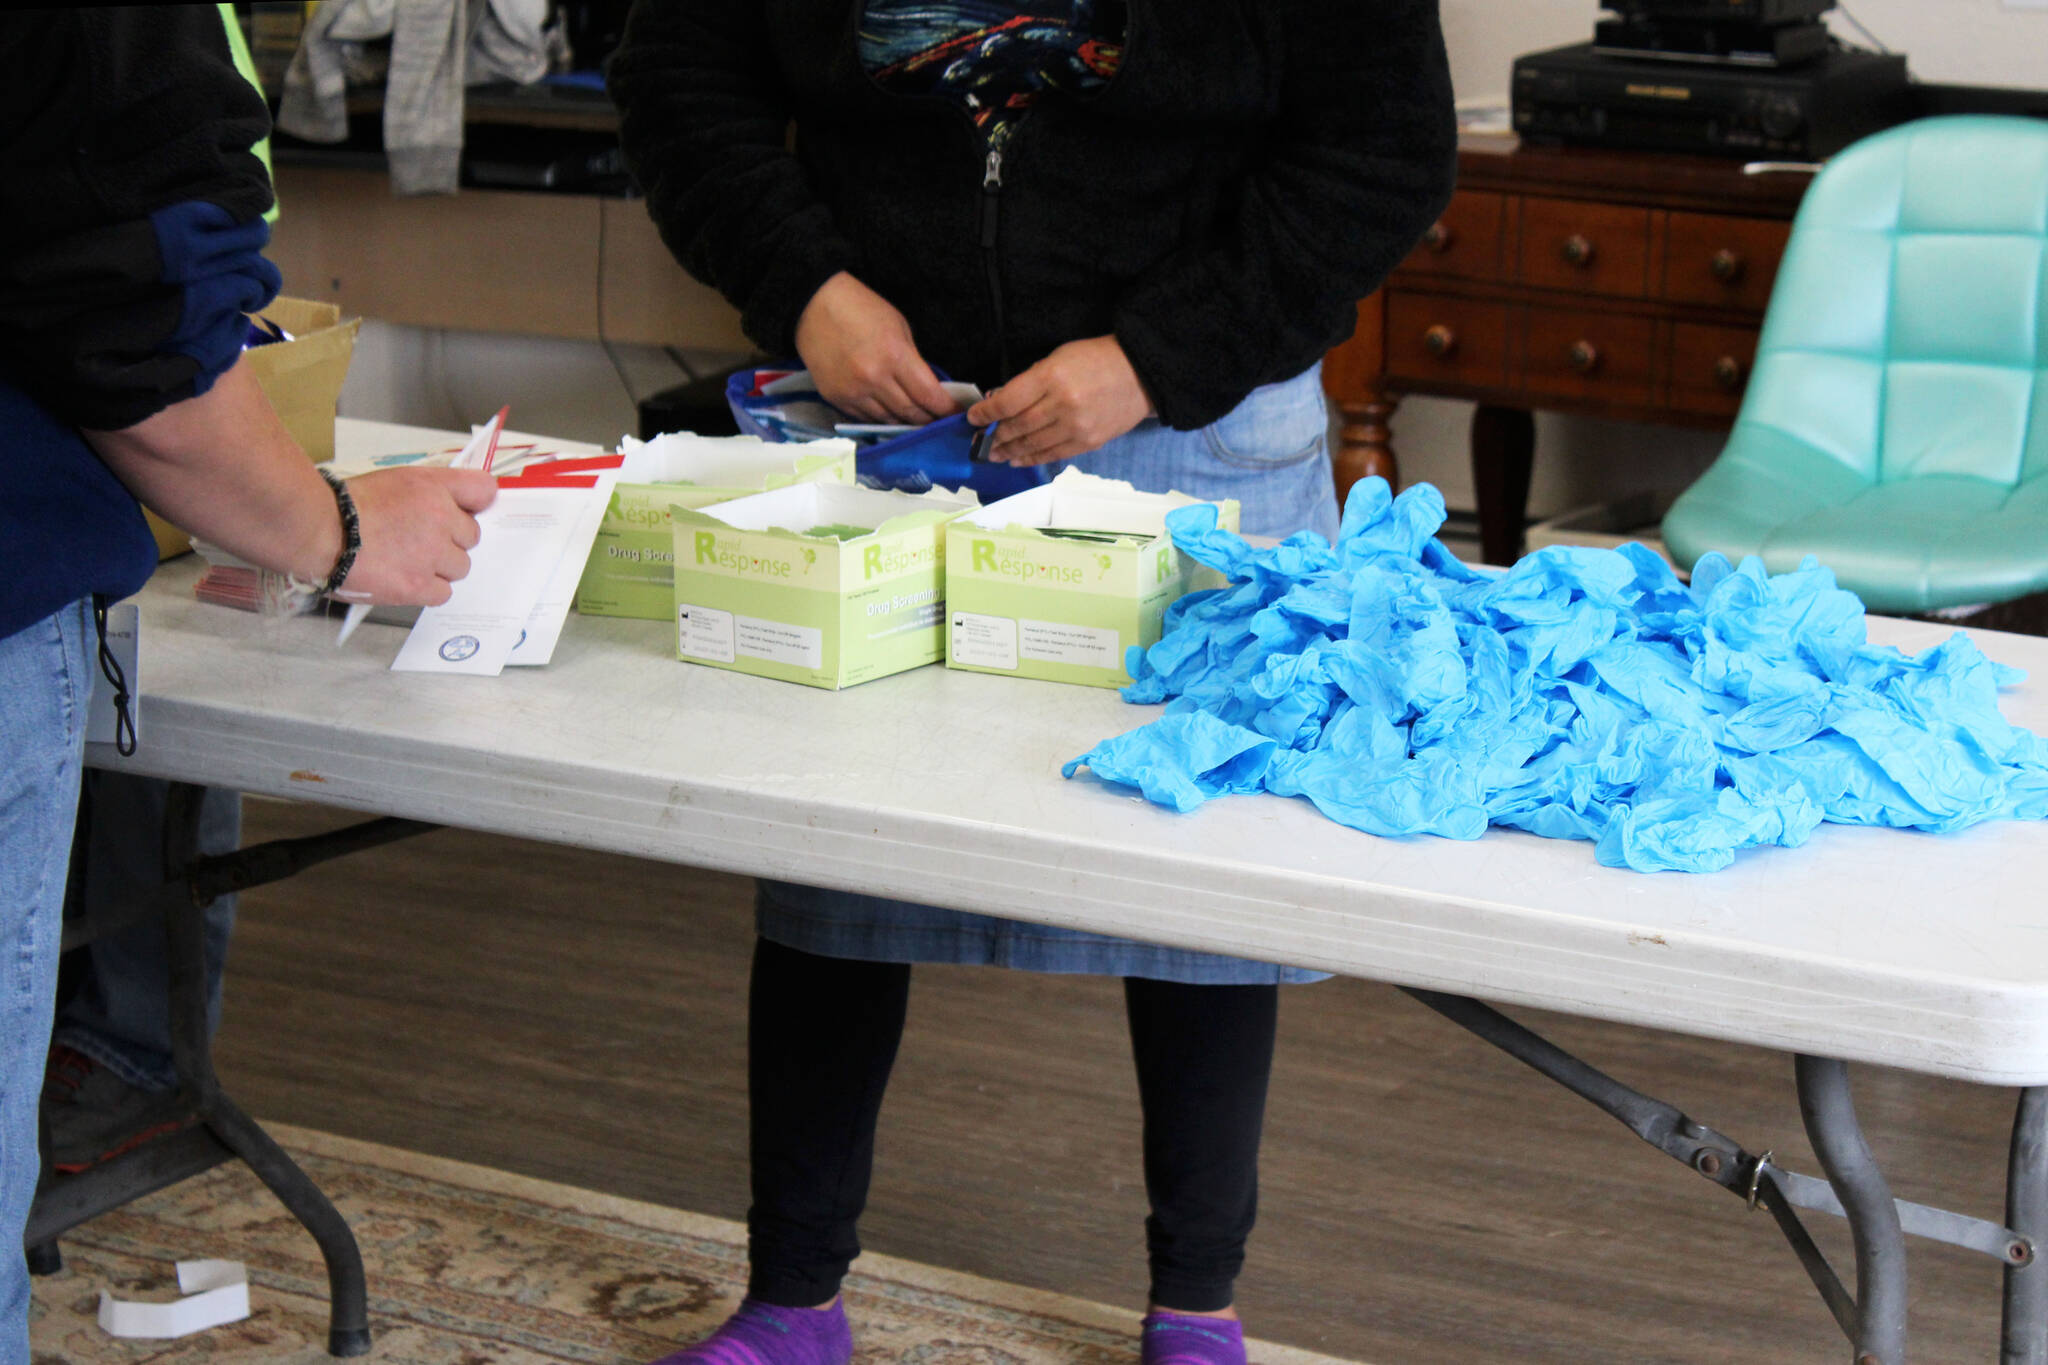 People assemble Narcan kits on Thursday, Aug. 12, 2021, at Freedom House in Soldotna, Alaska. The Kenai Peninsula Borough Assembly during their Tuesday, Dec. 13, 2022, meeting accepted another $30,000 payment as part of a nationwide opioid settlement, which will be put toward opioid remediation in the borough. (Ashlyn O’Hara/Peninsula Clarion)